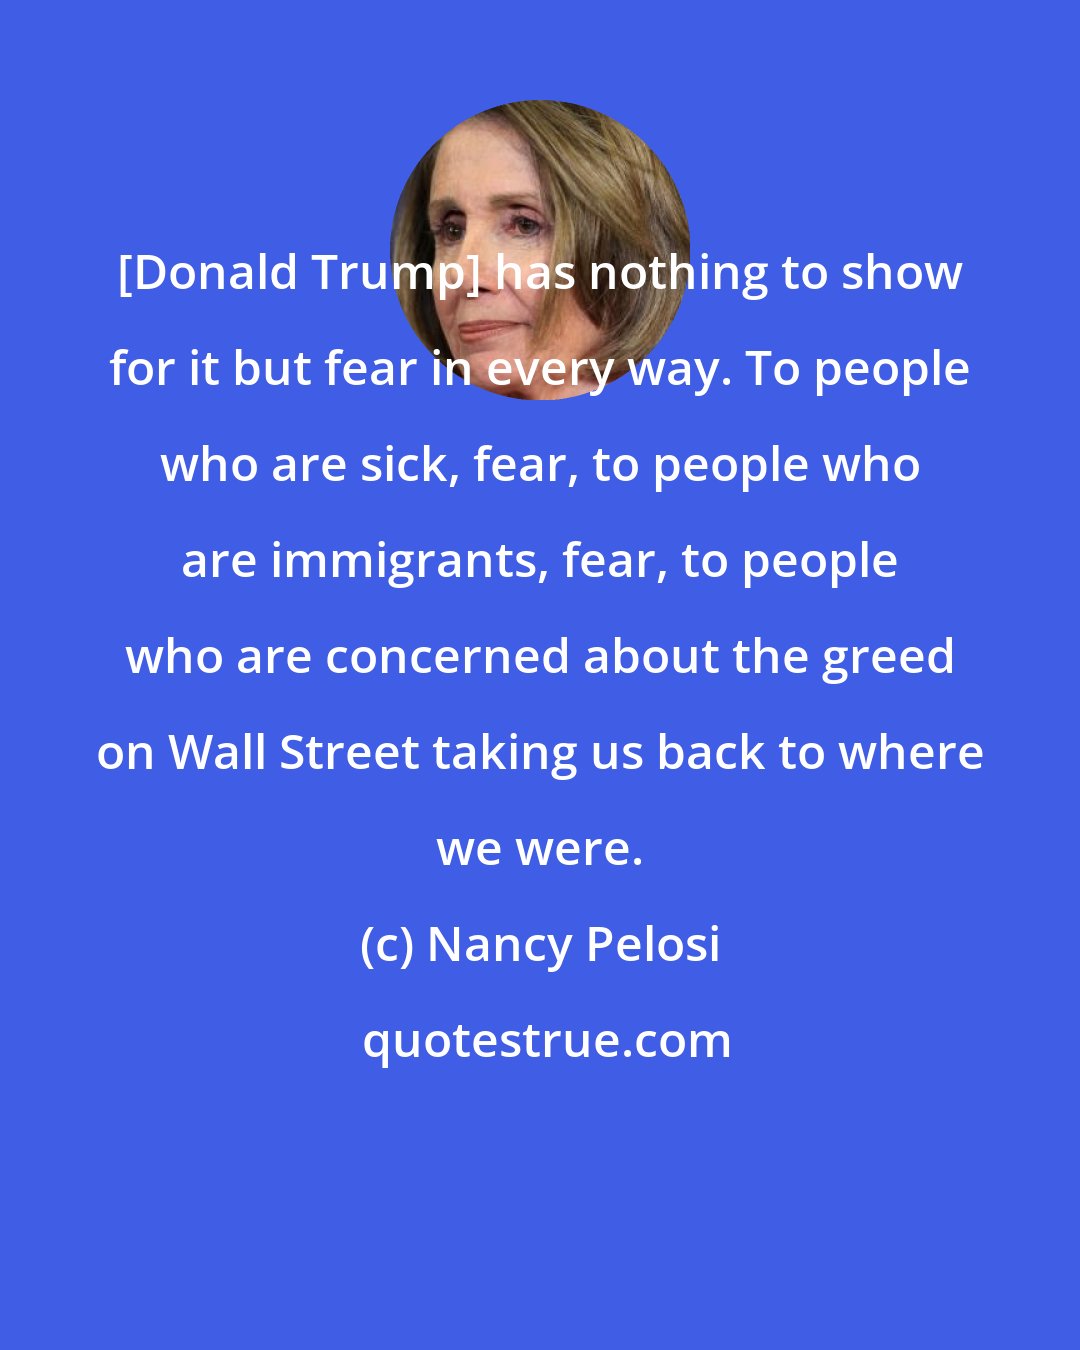 Nancy Pelosi: [Donald Trump] has nothing to show for it but fear in every way. To people who are sick, fear, to people who are immigrants, fear, to people who are concerned about the greed on Wall Street taking us back to where we were.